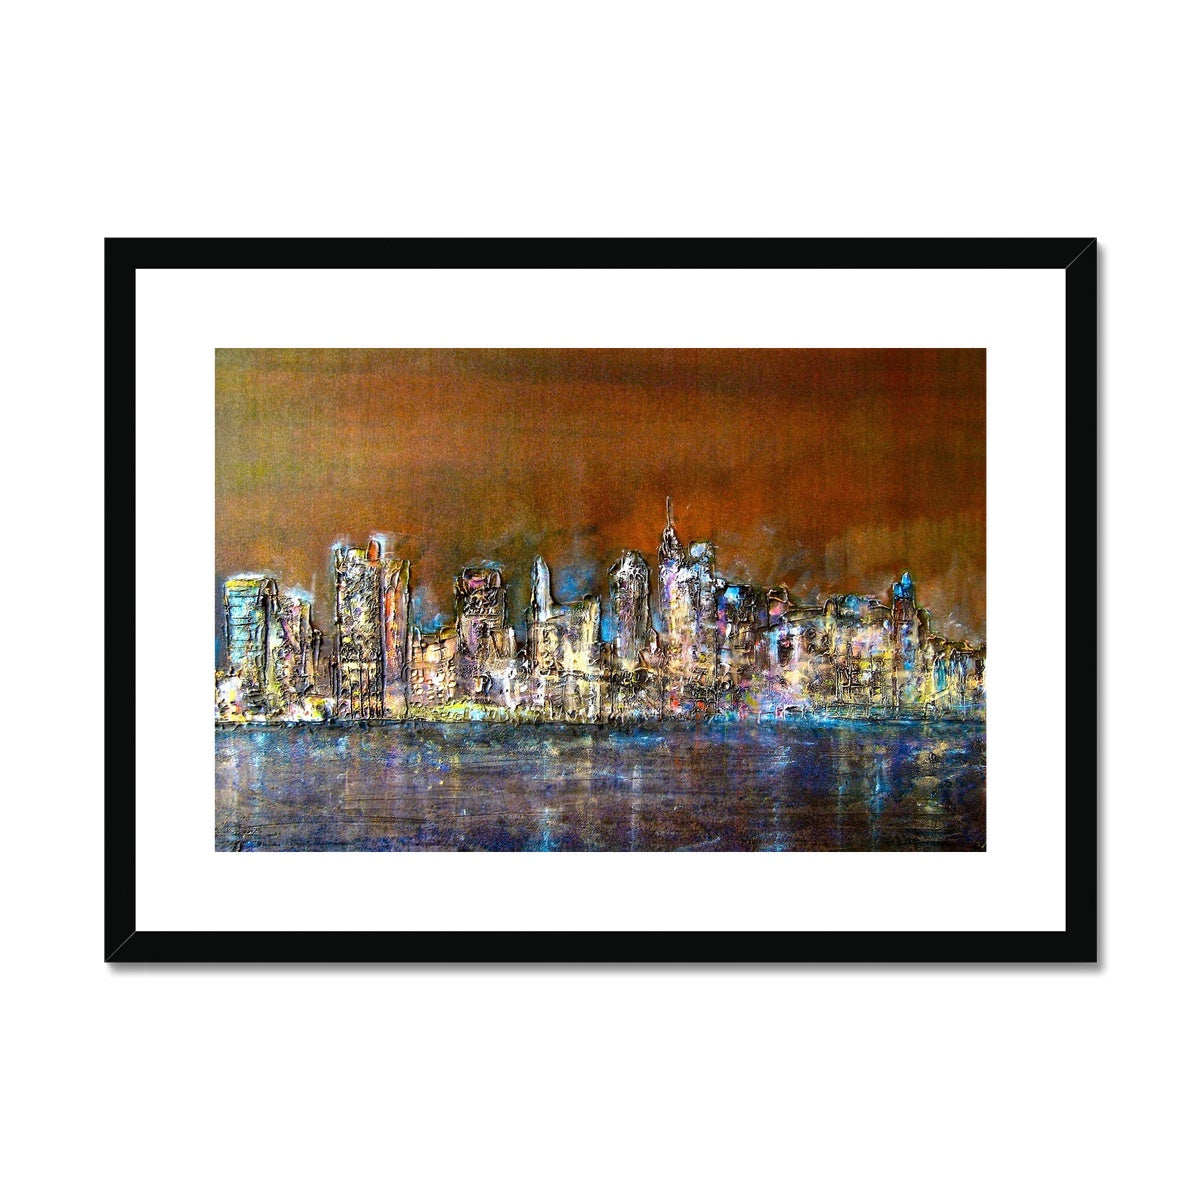 Manhattan Nights Painting | Framed & Mounted Prints From Scotland-Framed & Mounted Prints-World Art Gallery-A2 Landscape-Black Frame-Paintings, Prints, Homeware, Art Gifts From Scotland By Scottish Artist Kevin Hunter